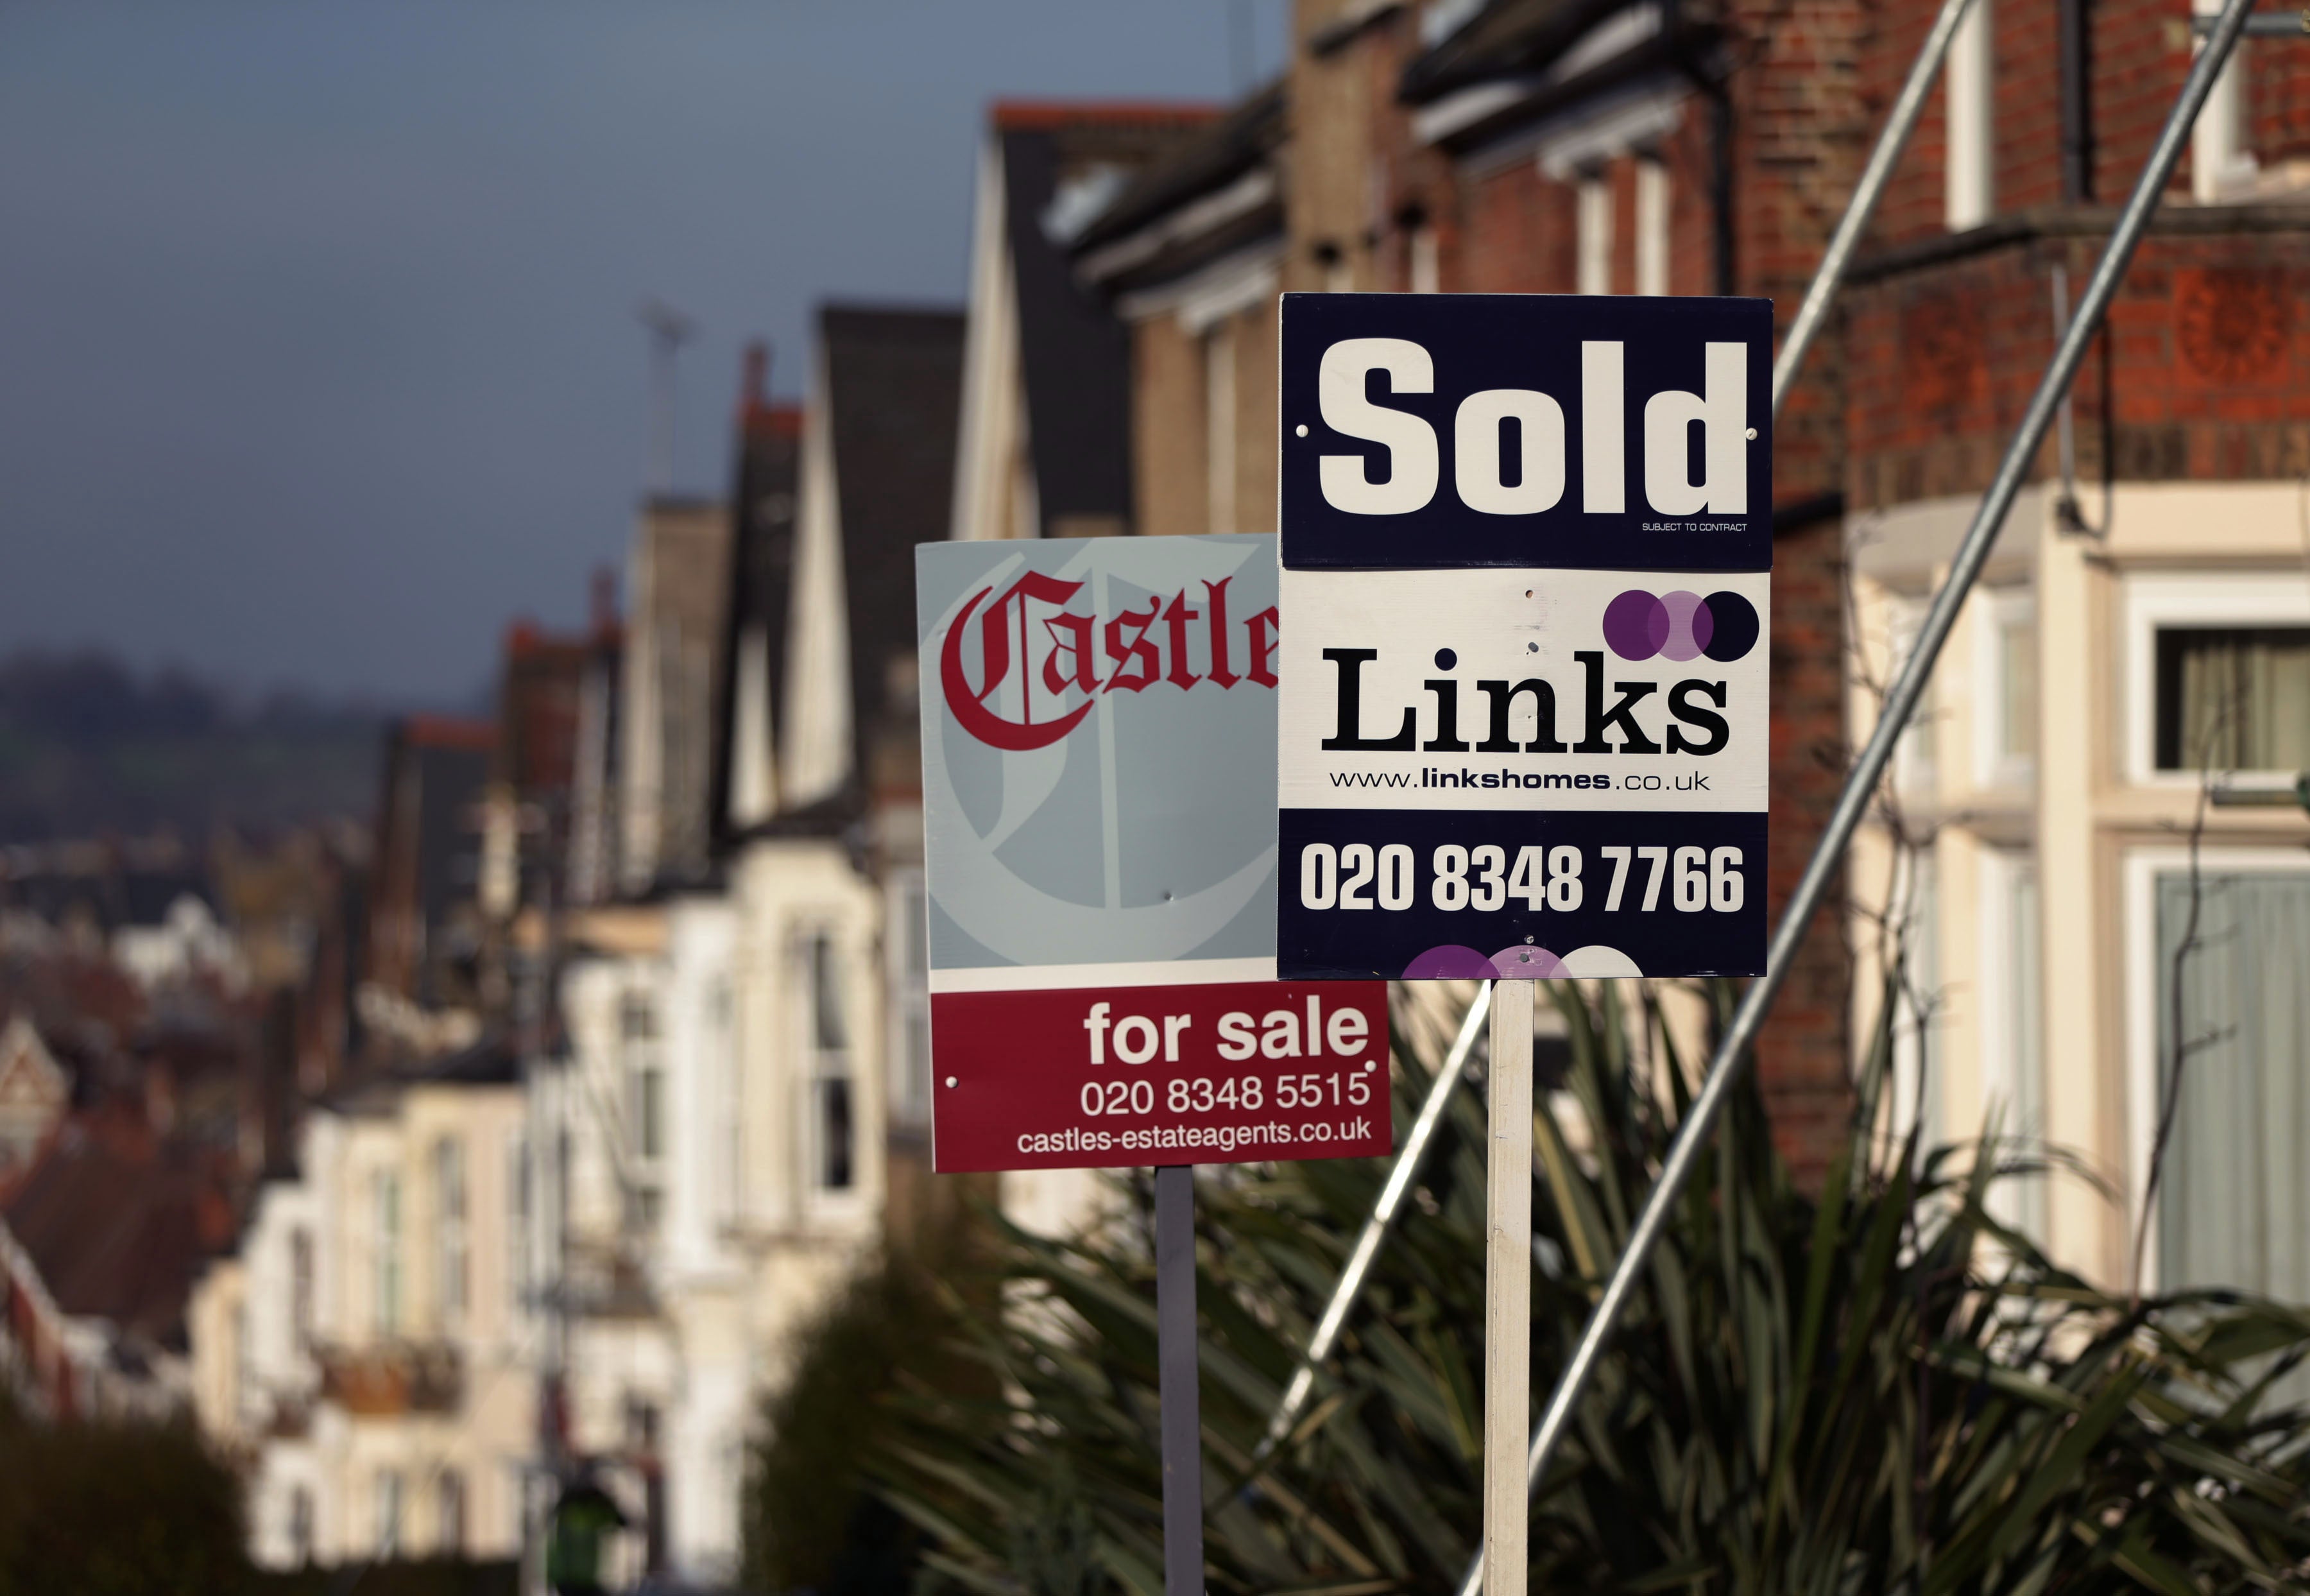 Out of reach: UK house prices are booming